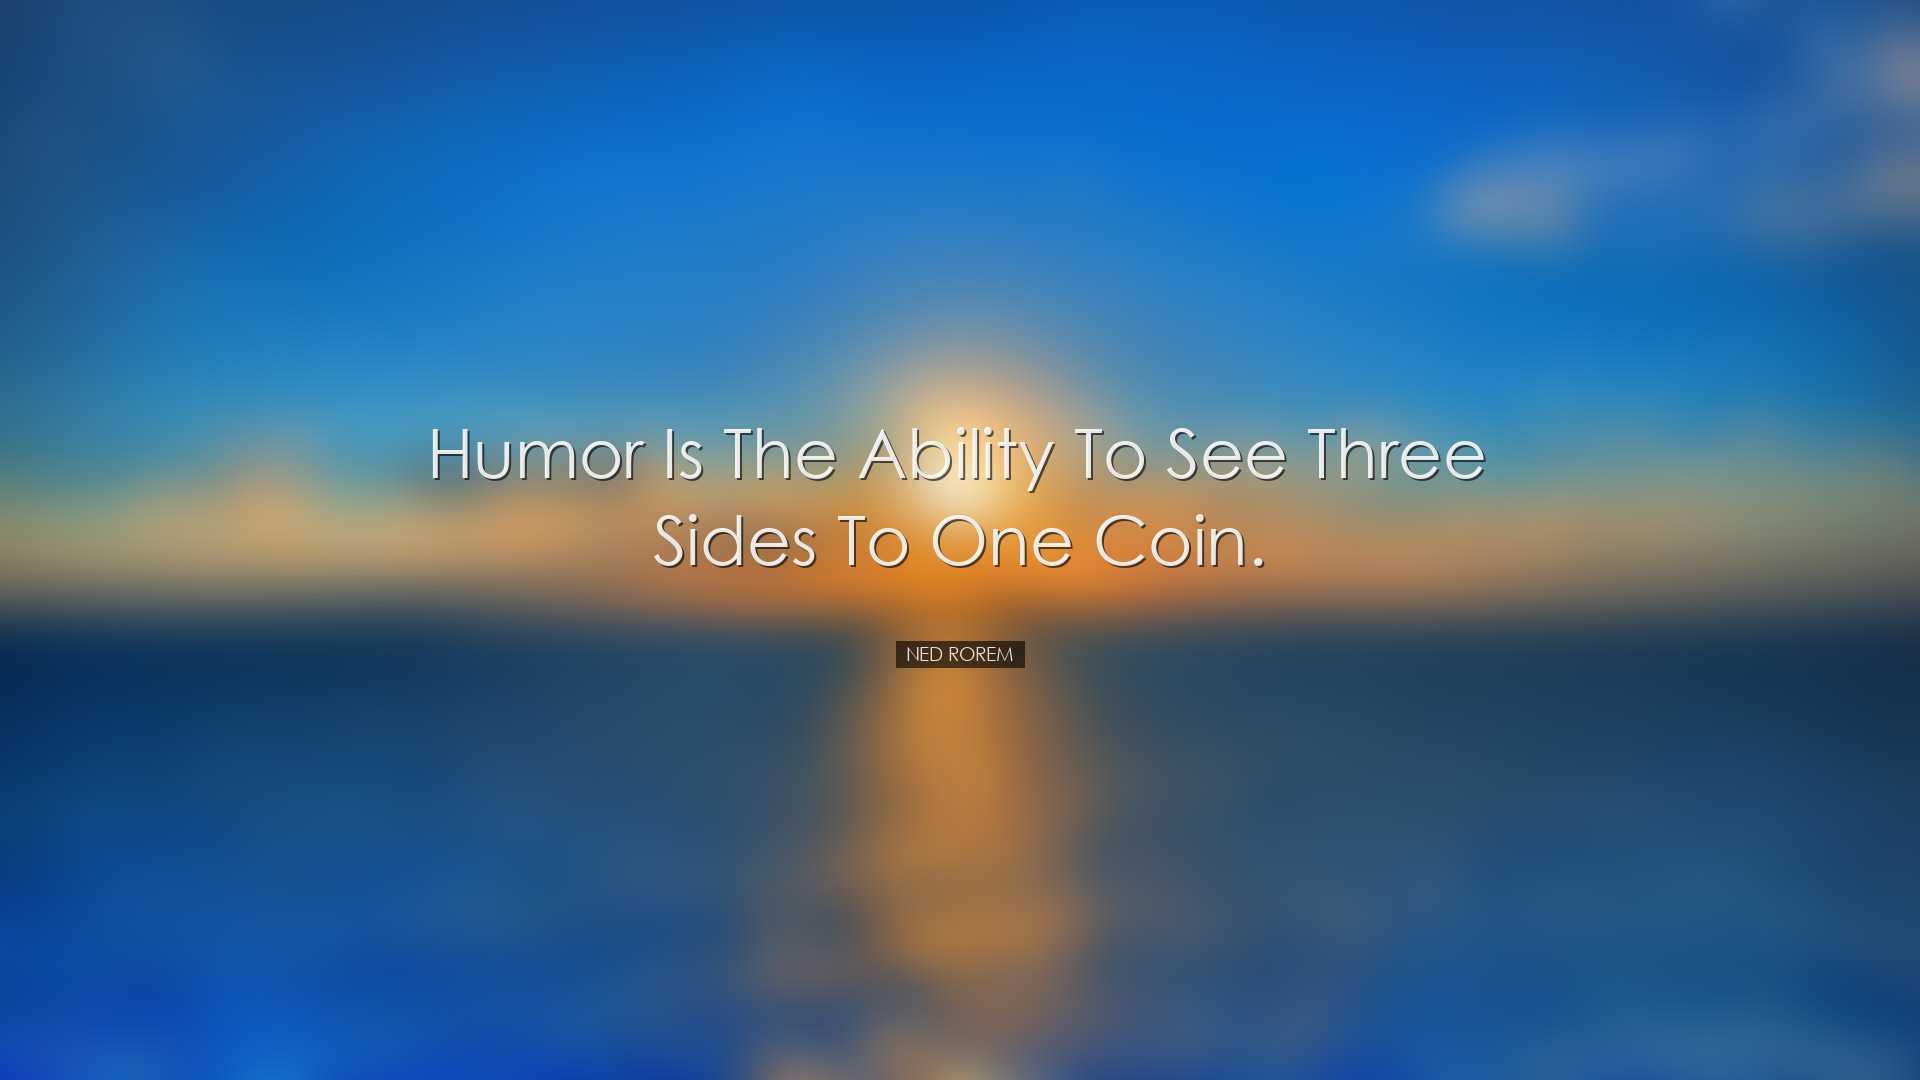 Humor is the ability to see three sides to one coin. - Ned Rorem